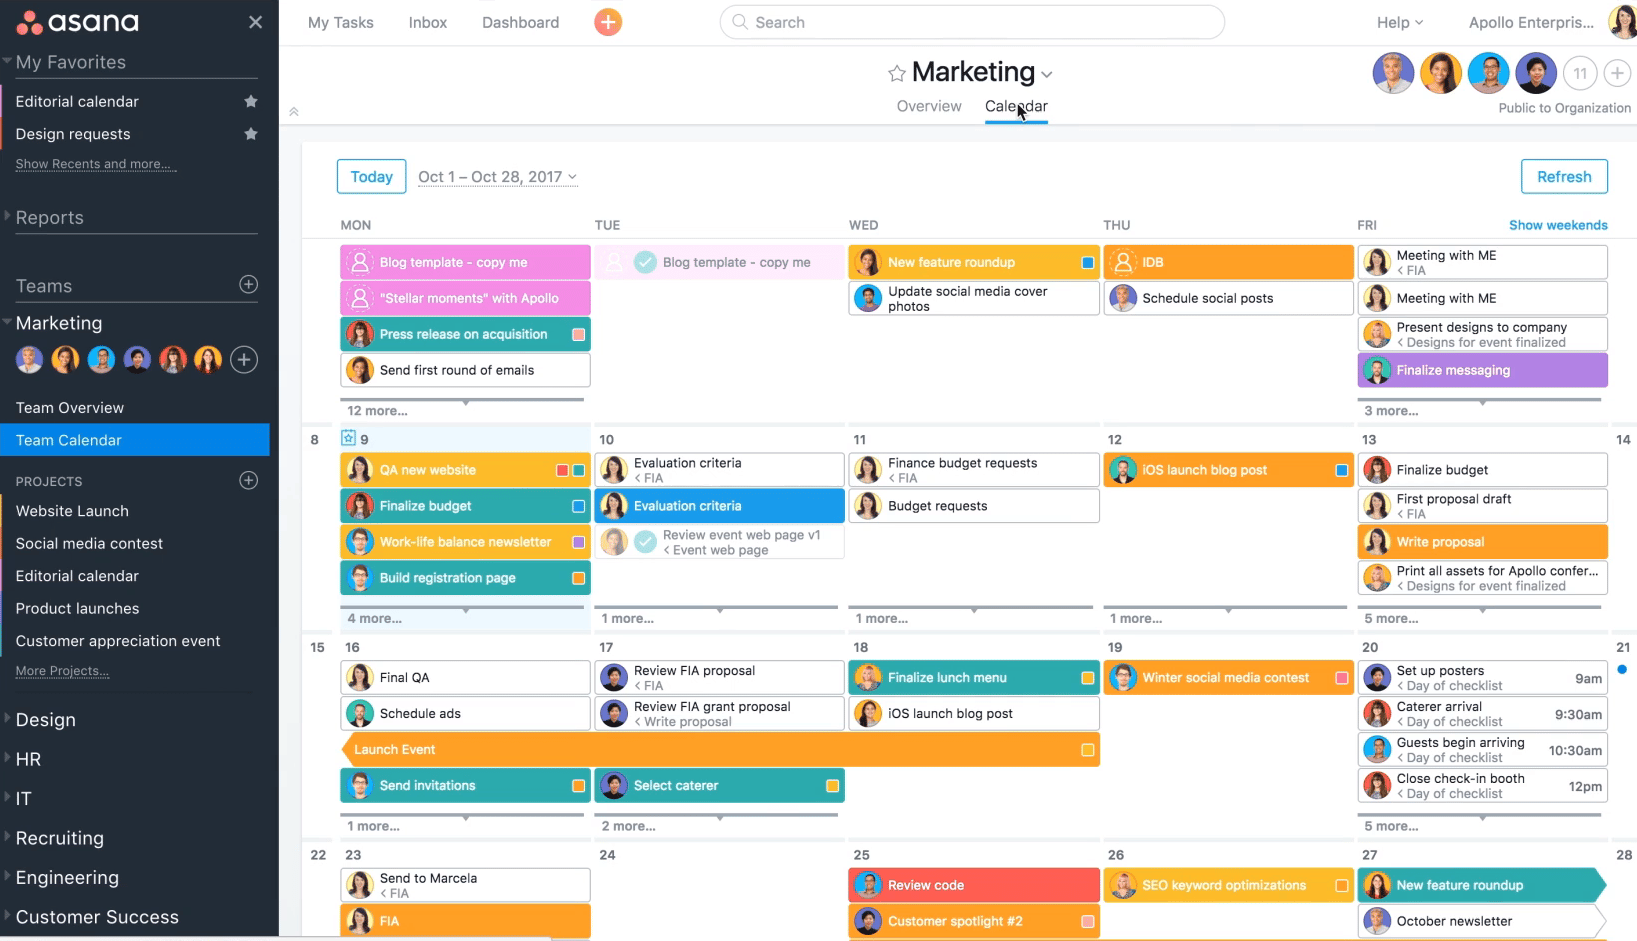 Asana is a great project management tool with a colorful dashboard